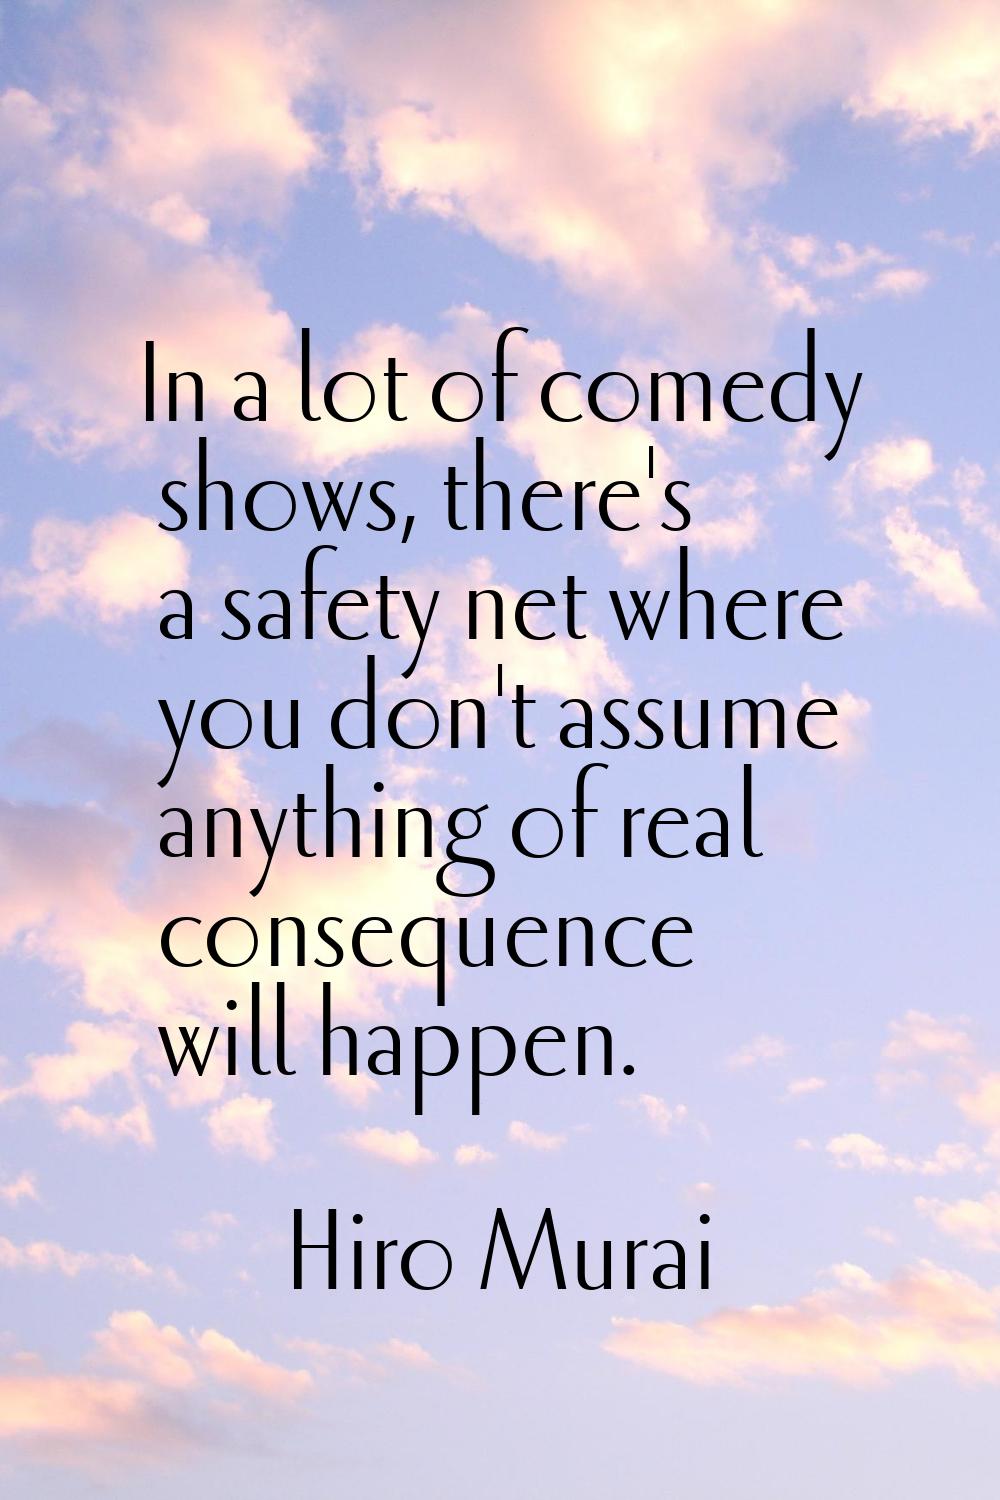 In a lot of comedy shows, there's a safety net where you don't assume anything of real consequence 